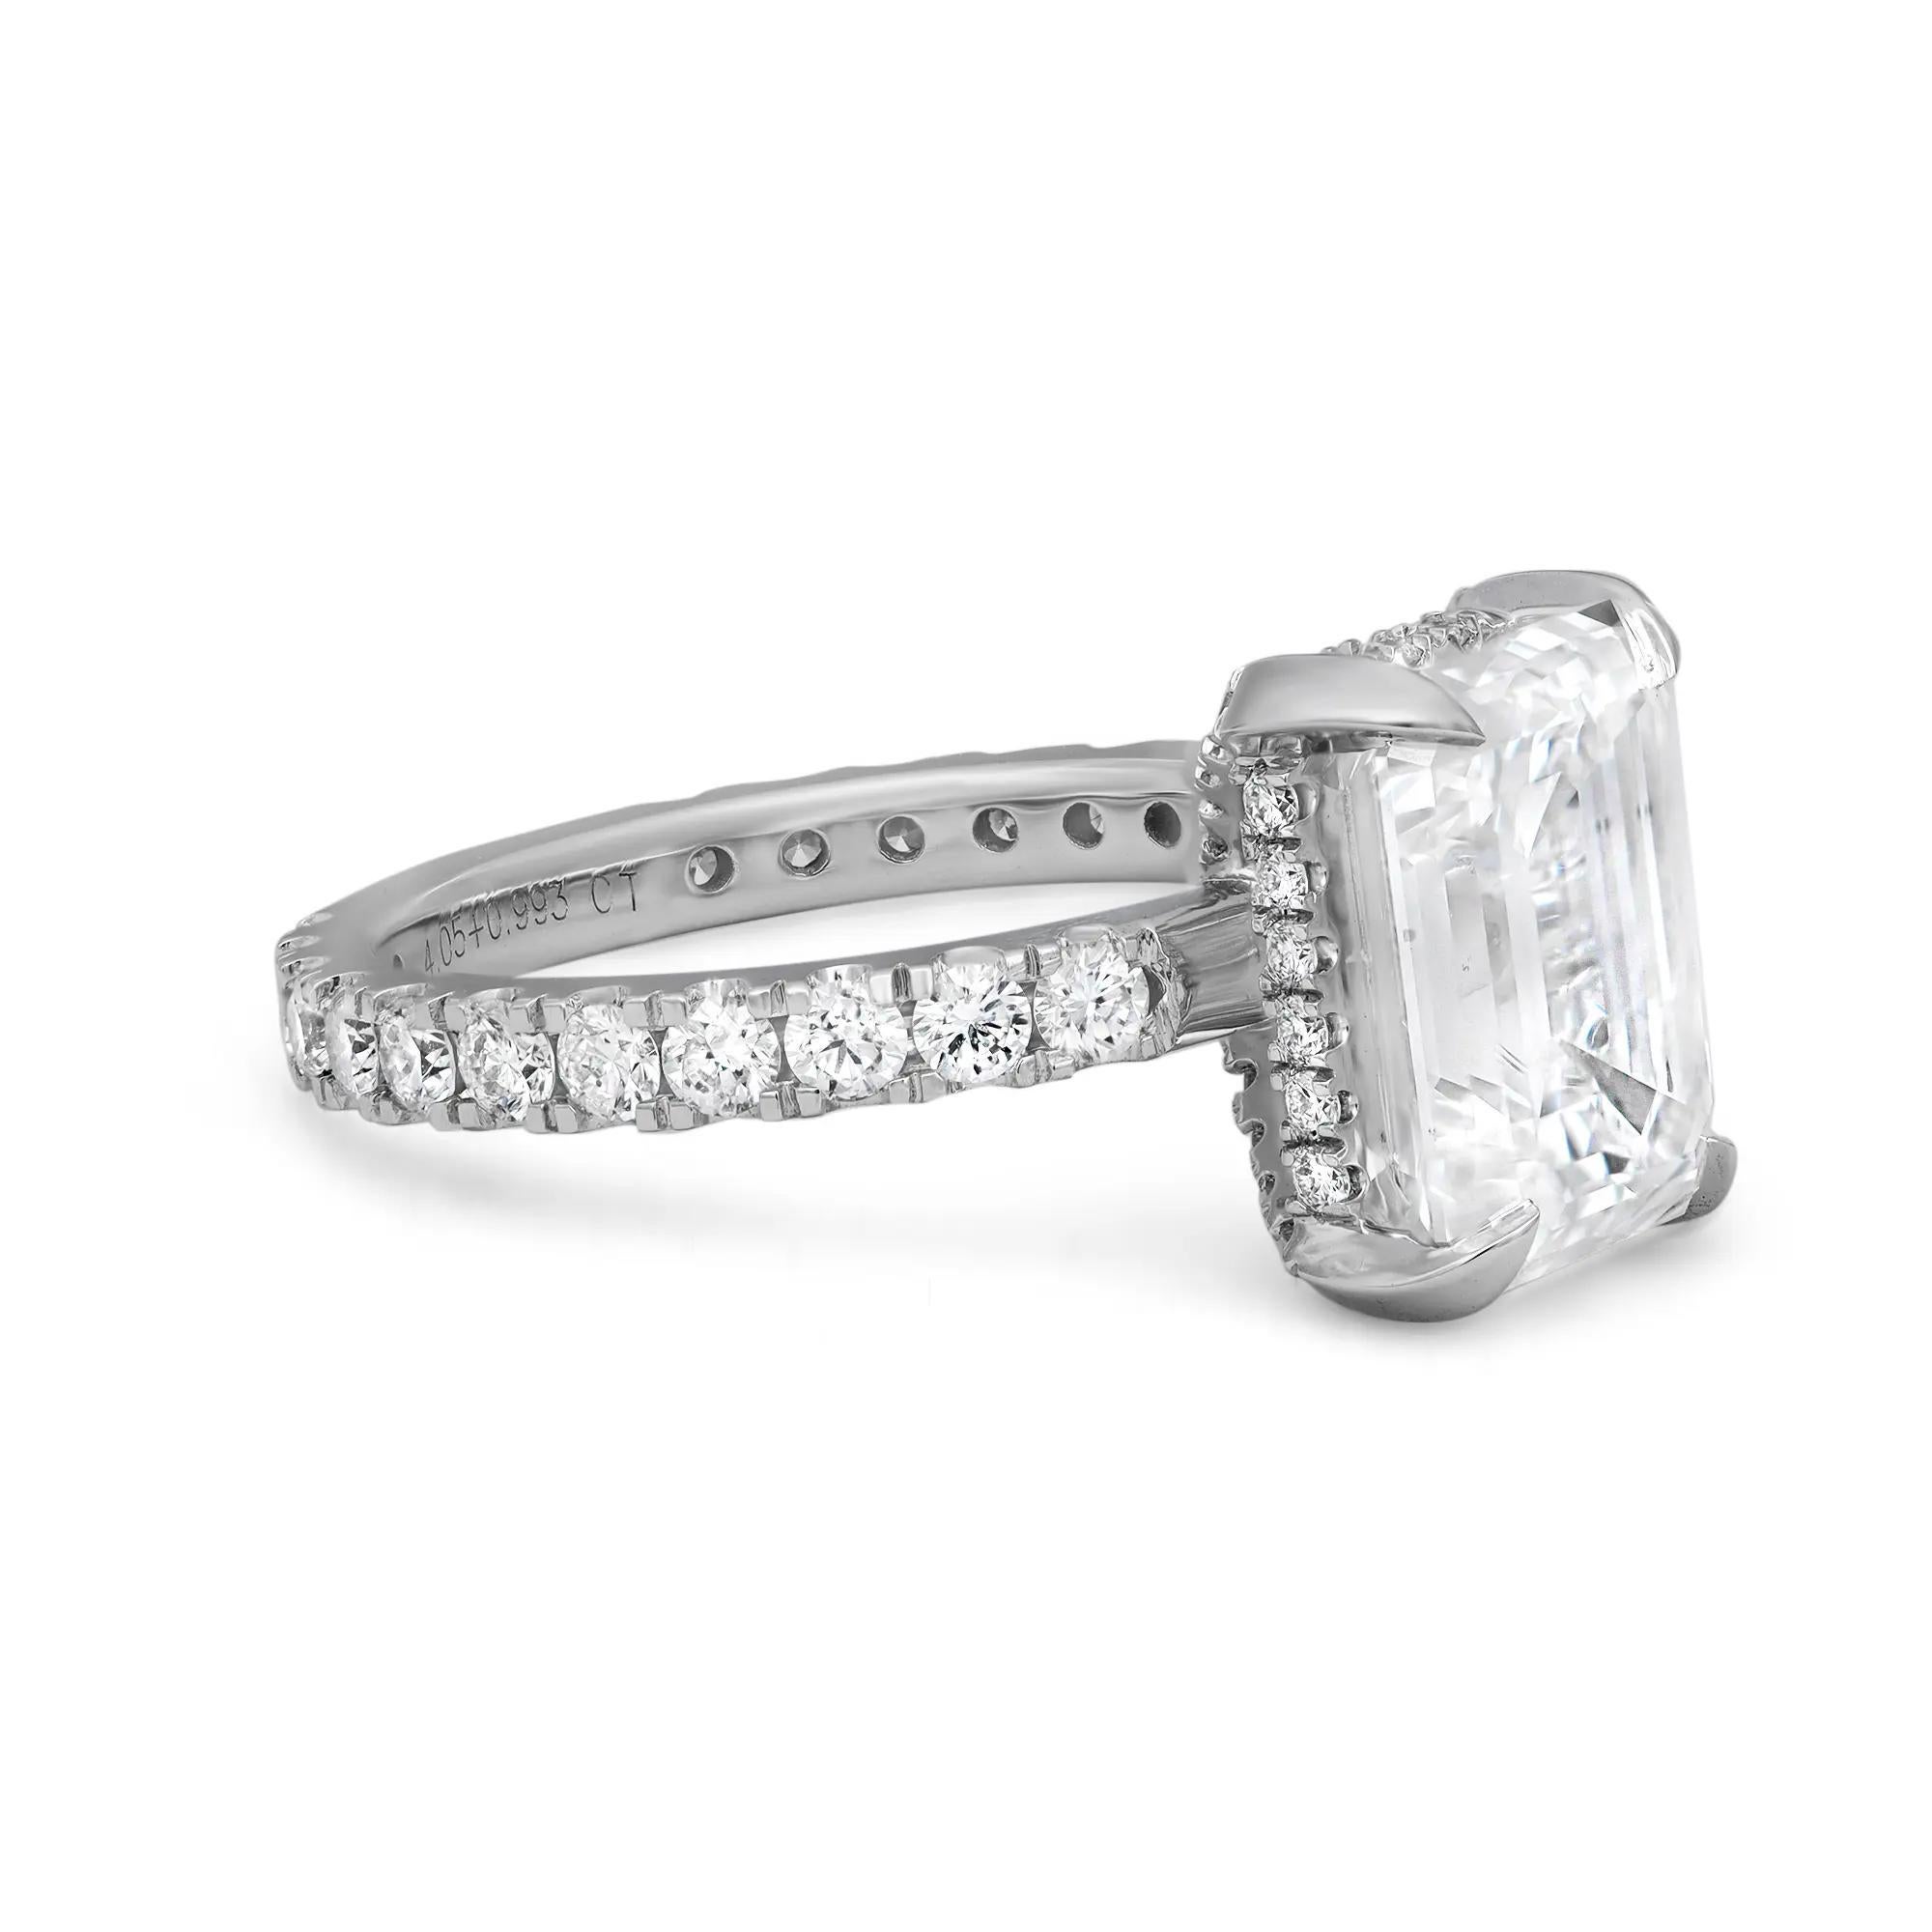 This enchanting ring is adorned with a sparkling GIA certified emerald cut lab grown diamond in the center, secured firmly in a beautiful four prong setting and a classic diamond shank that lends the final touch to the design aesthetic. The total